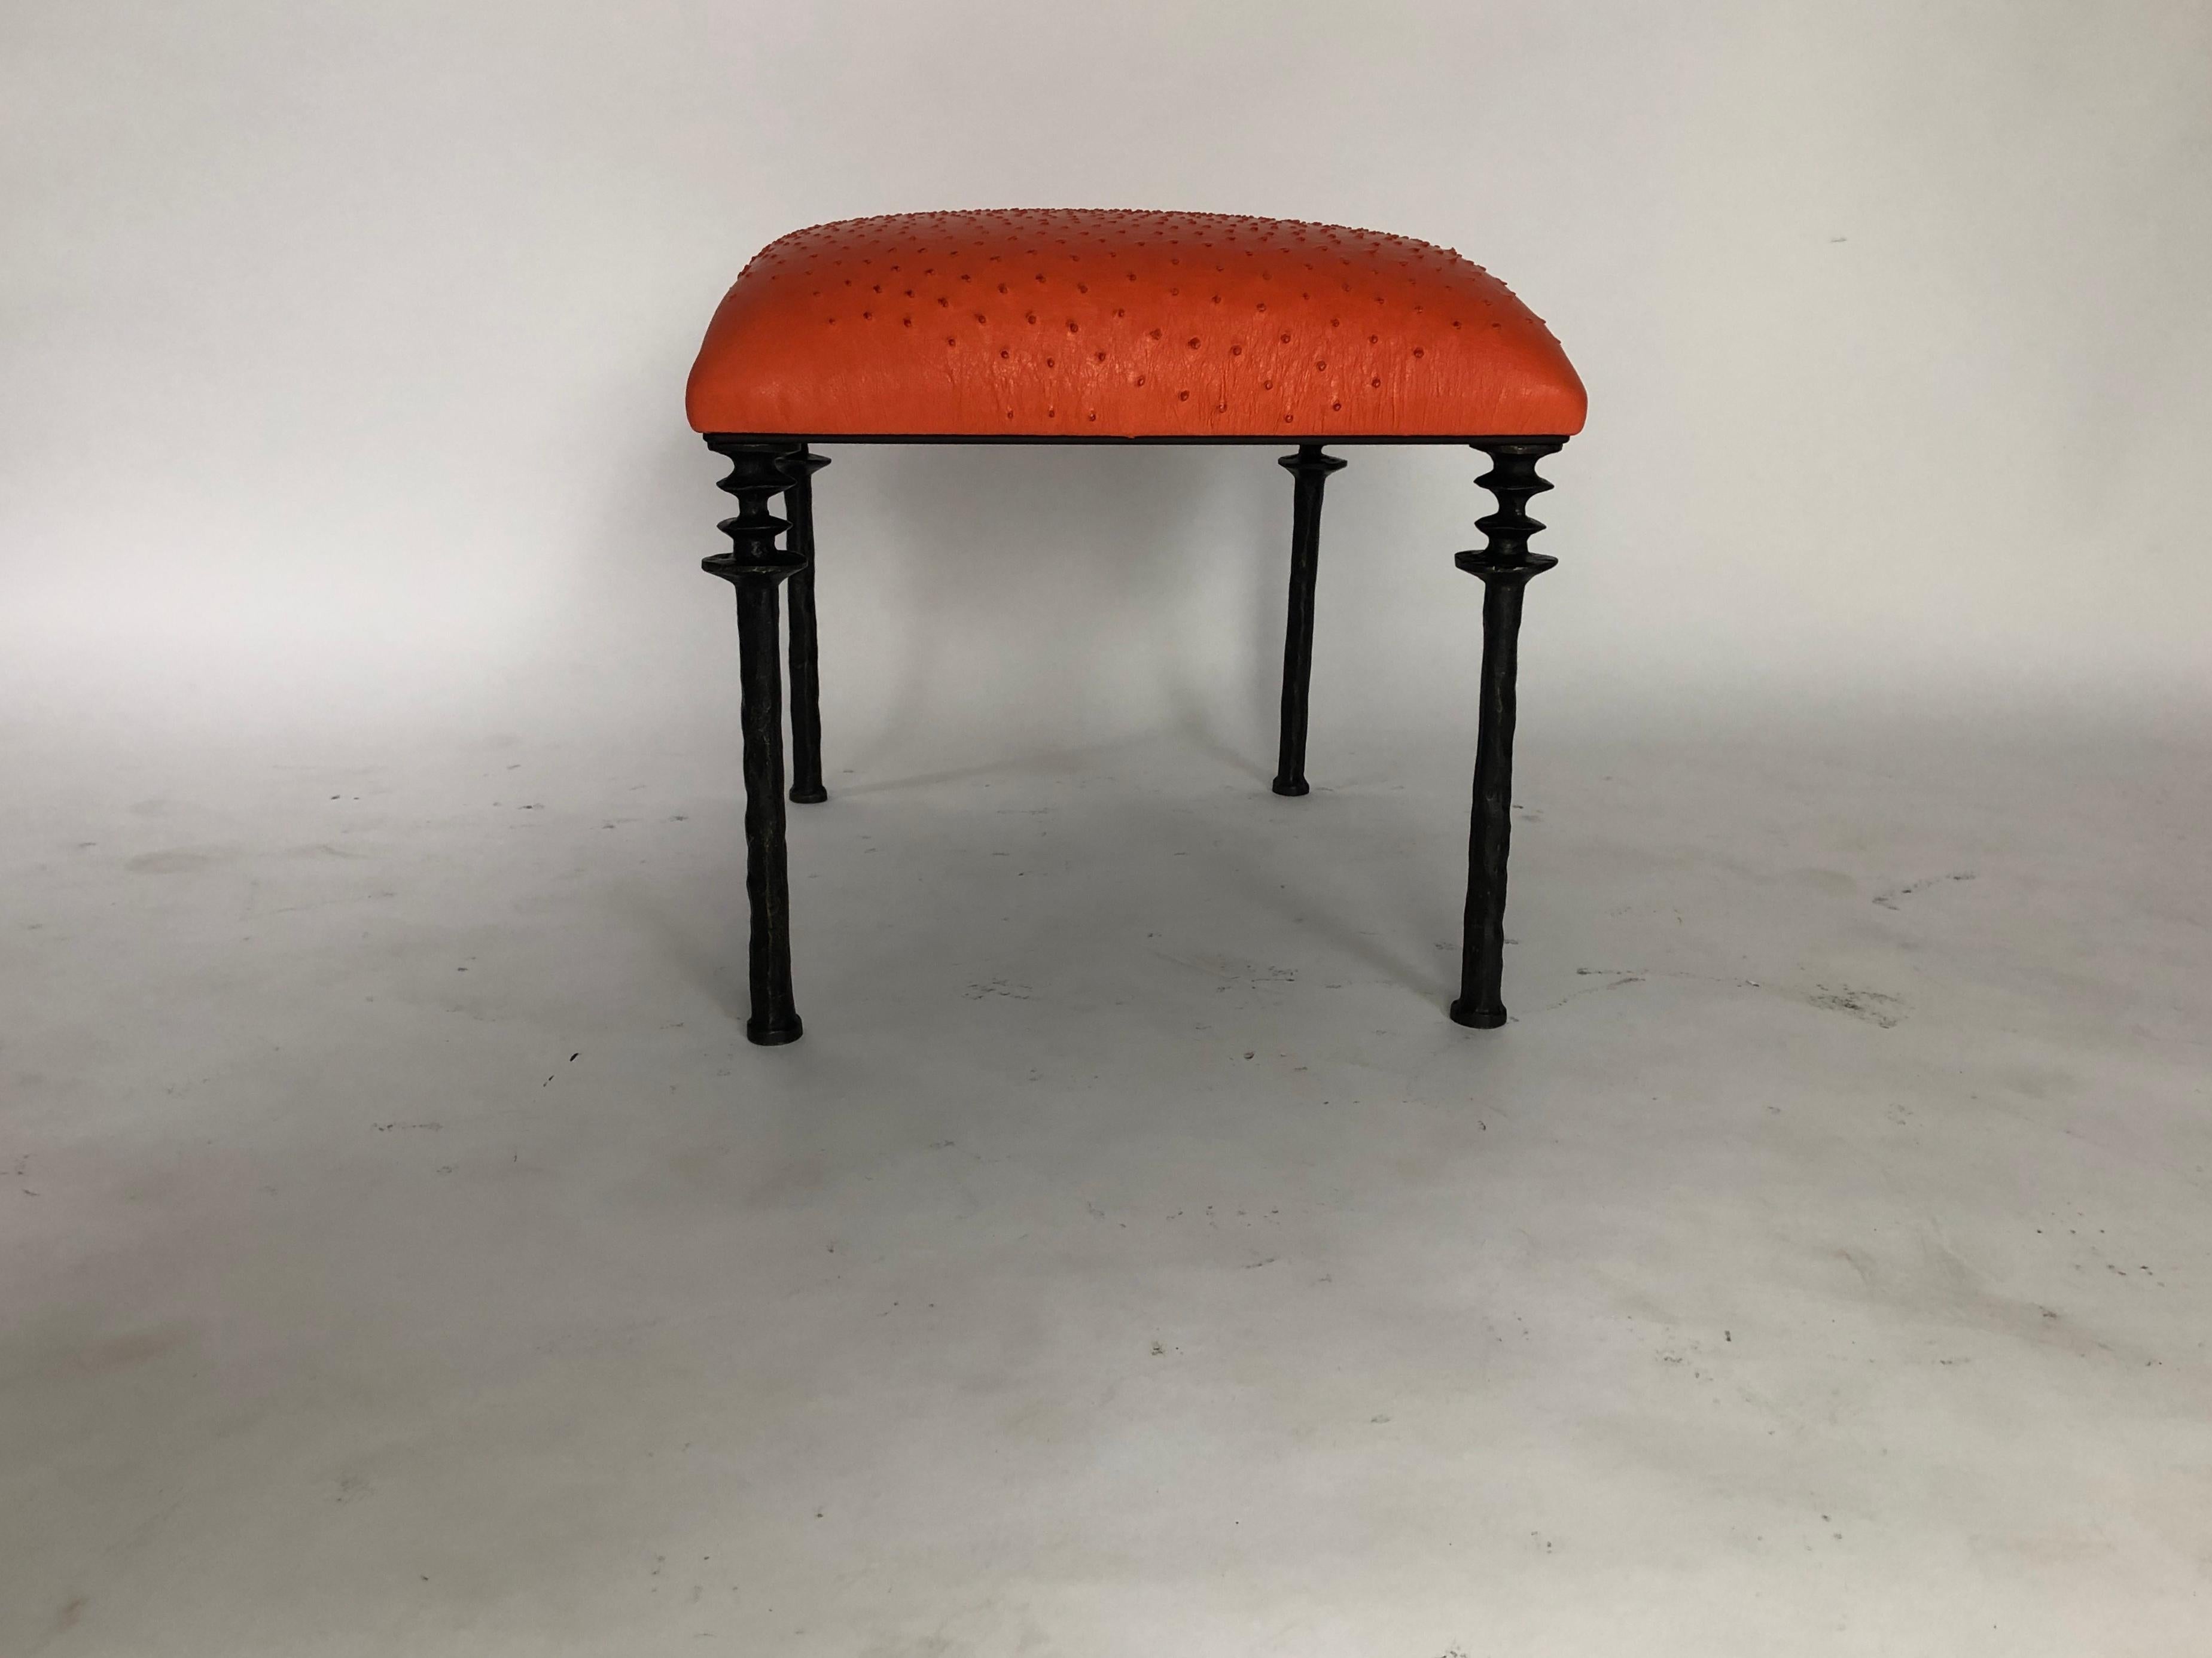 Pair of Sorgue Stools, by Bourgeois Boheme Atelier, Tangerine Ostrich Leather 1